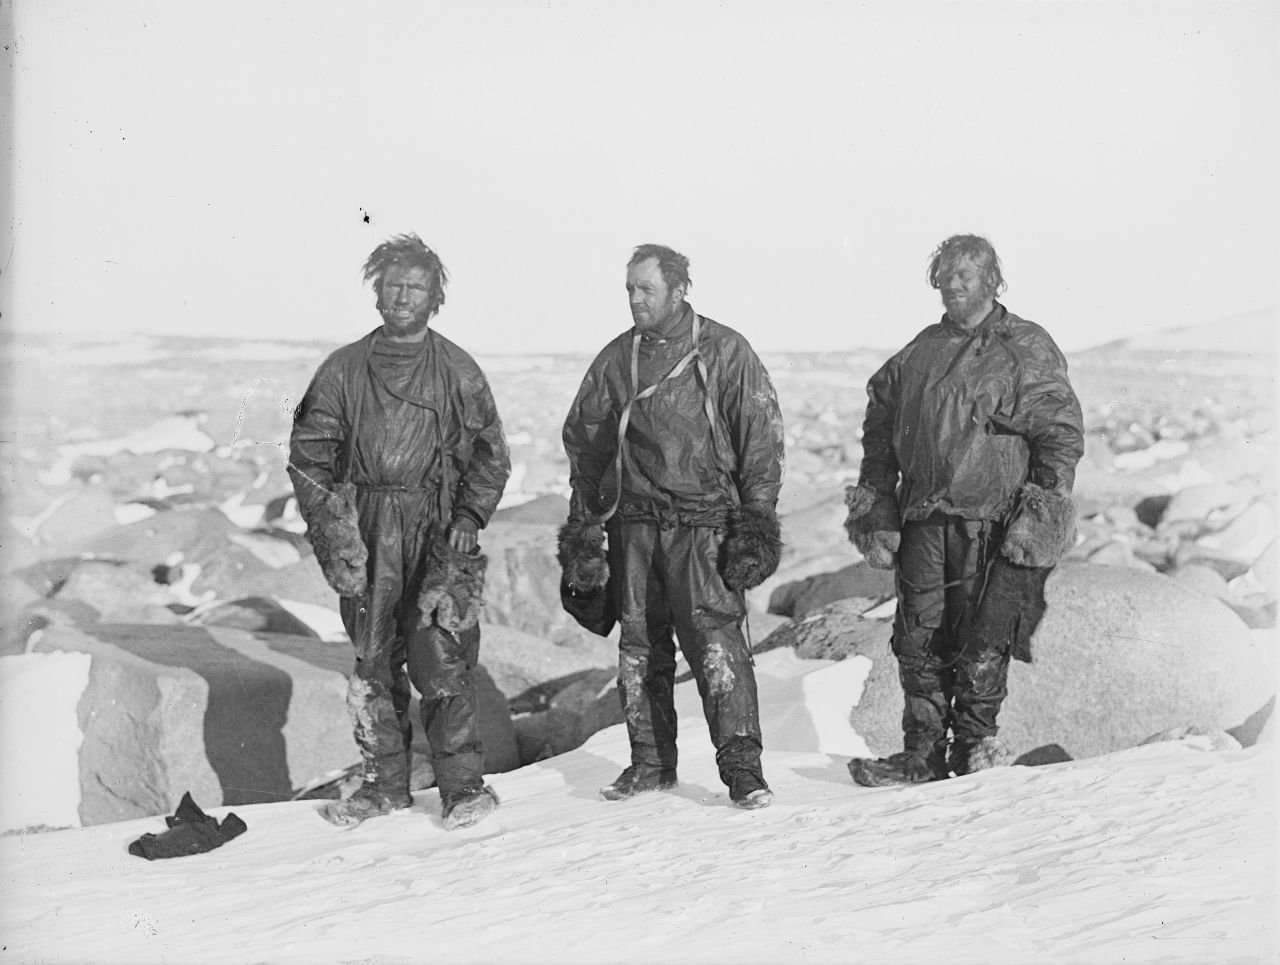 The "Northern Party" were trapped for months in an ice-cave during a perilous geological expedition in 1911. Photo: Members of the Northern party, by Murray Levick.